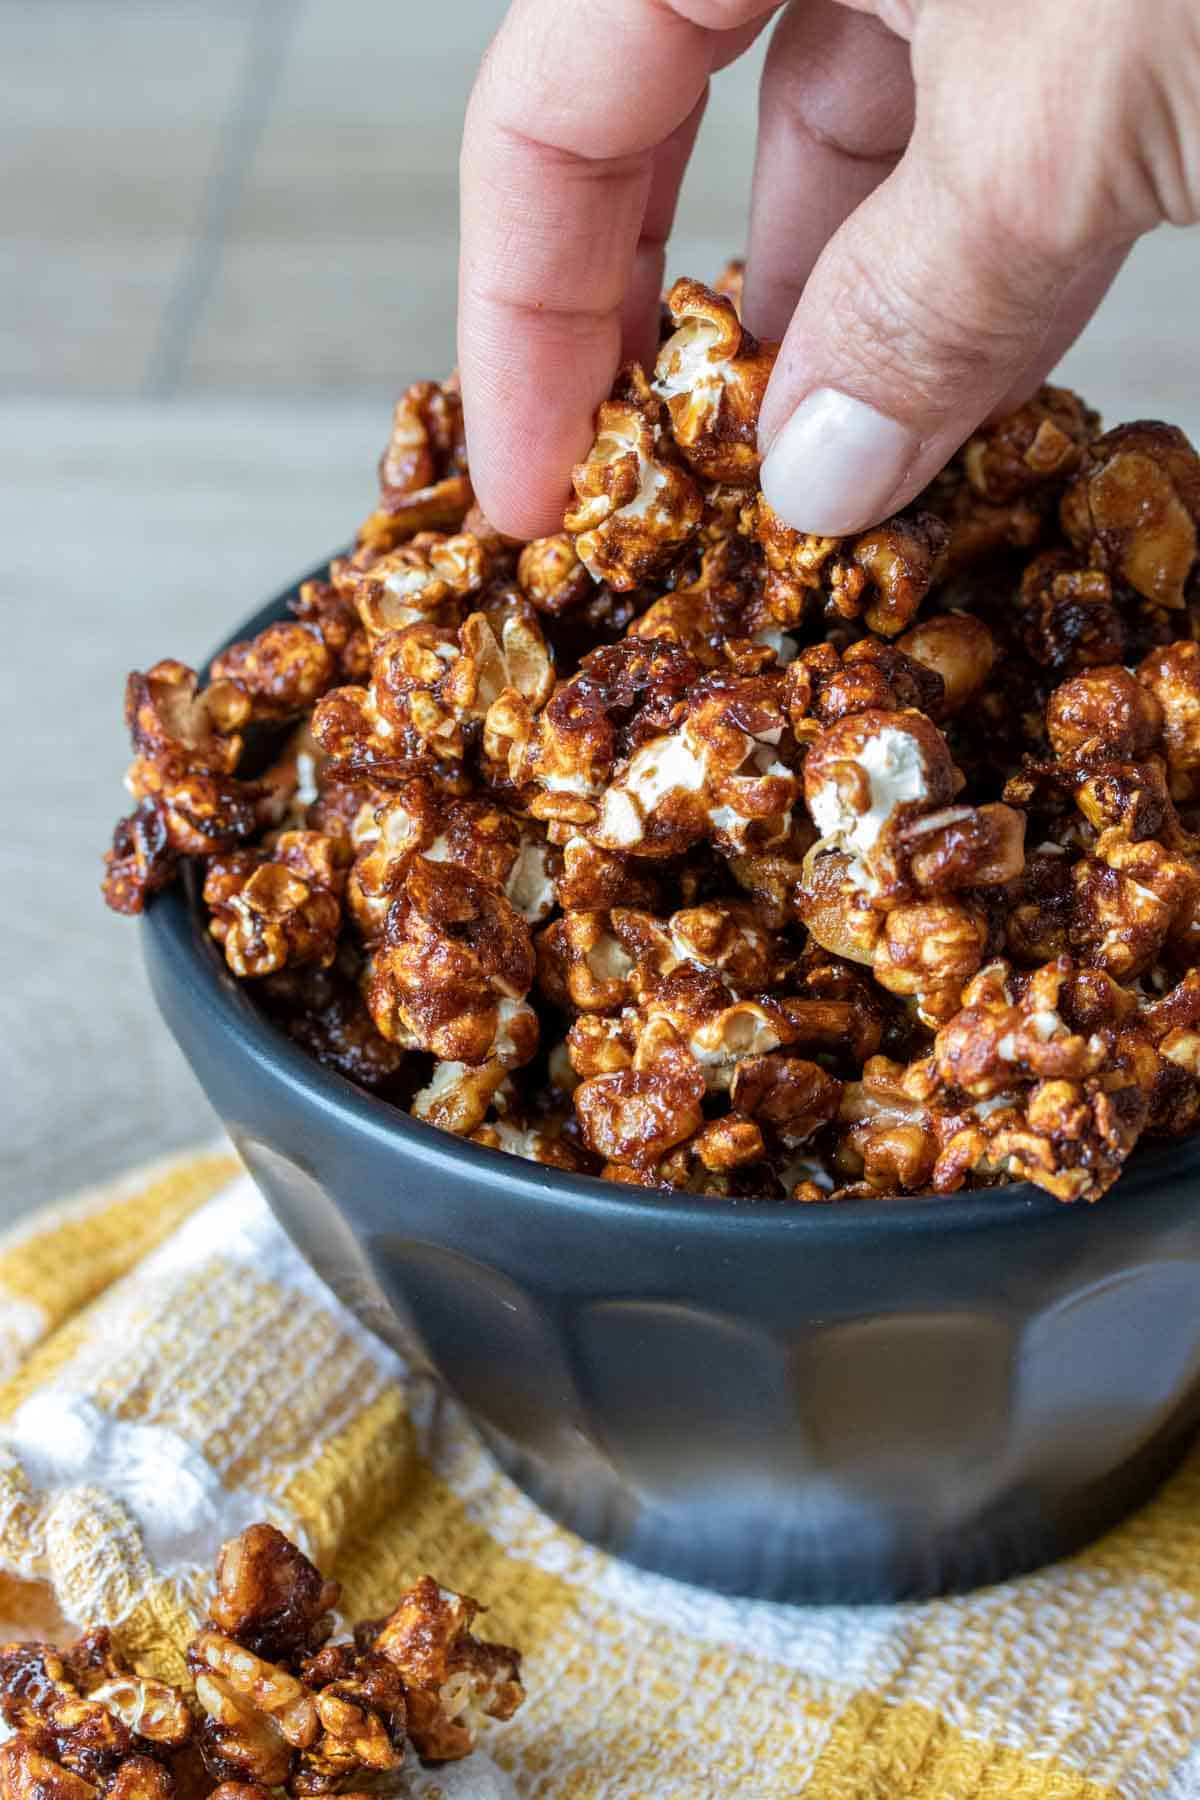 Hand grabbing some caramel popcorn from a black bowl on a yellow towel